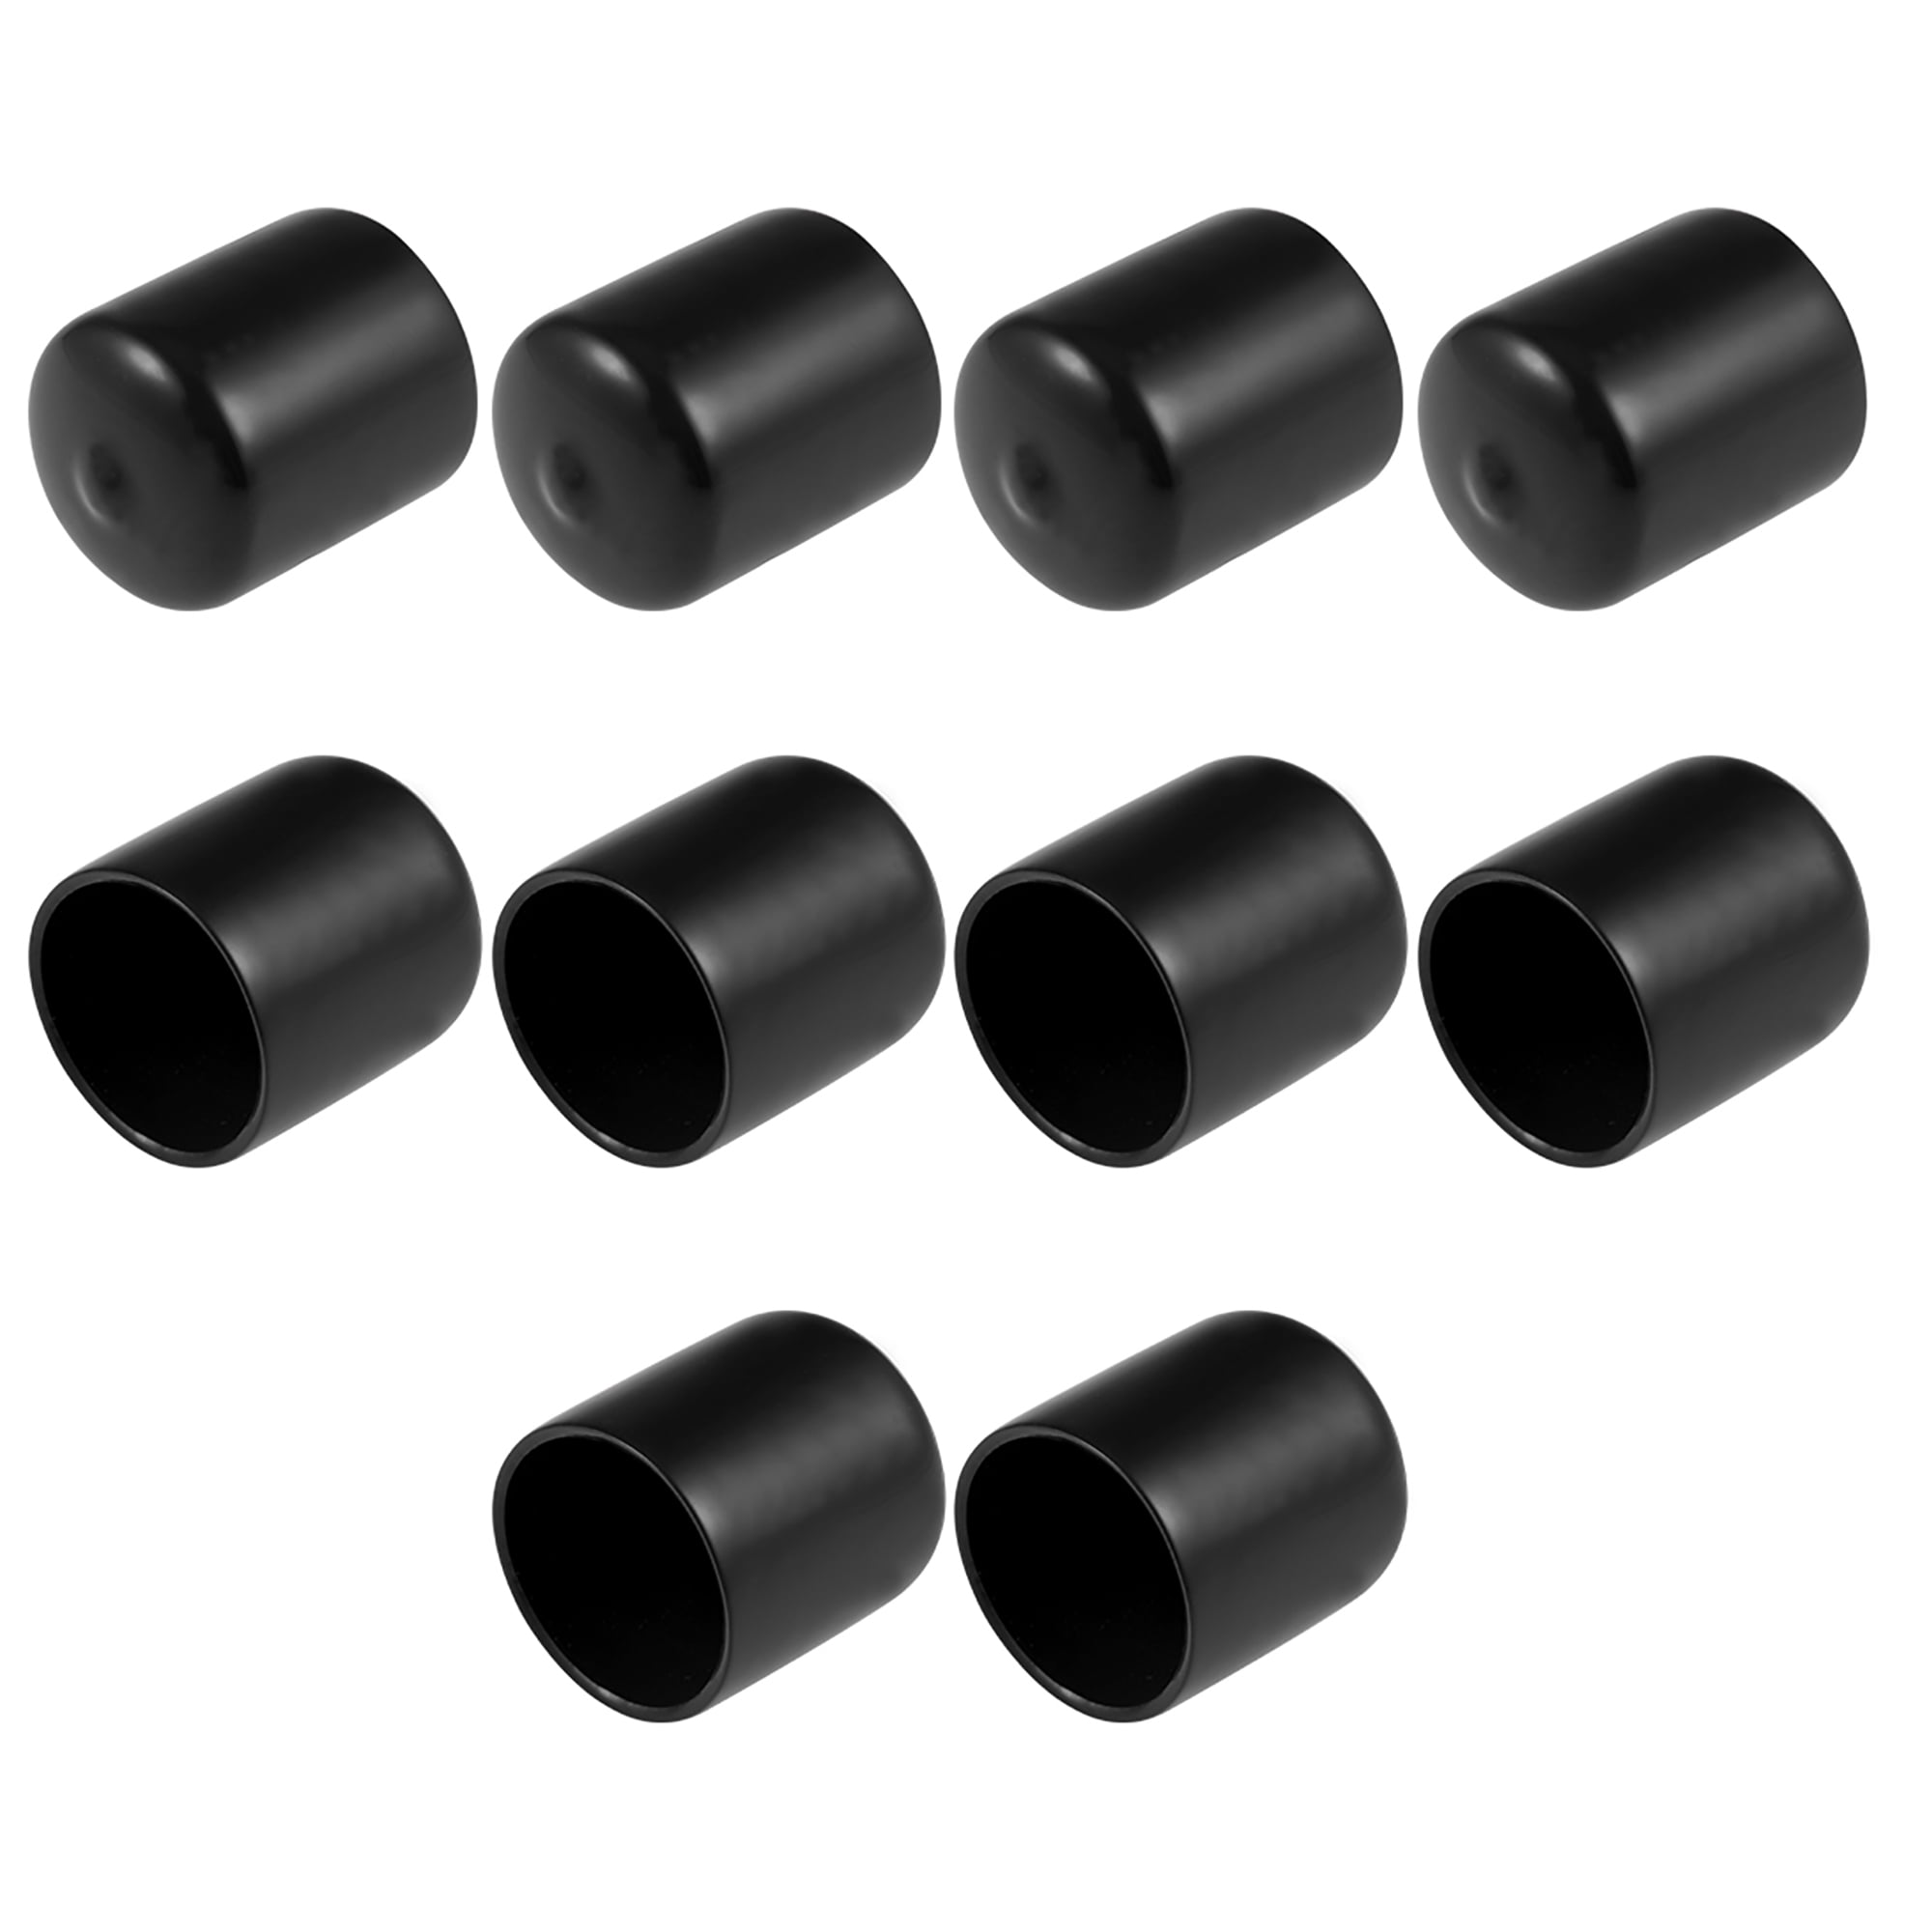 10pcs Round Plastic Floor Protector Furniture Chair Leg Pipe Tube End Caps Cover 